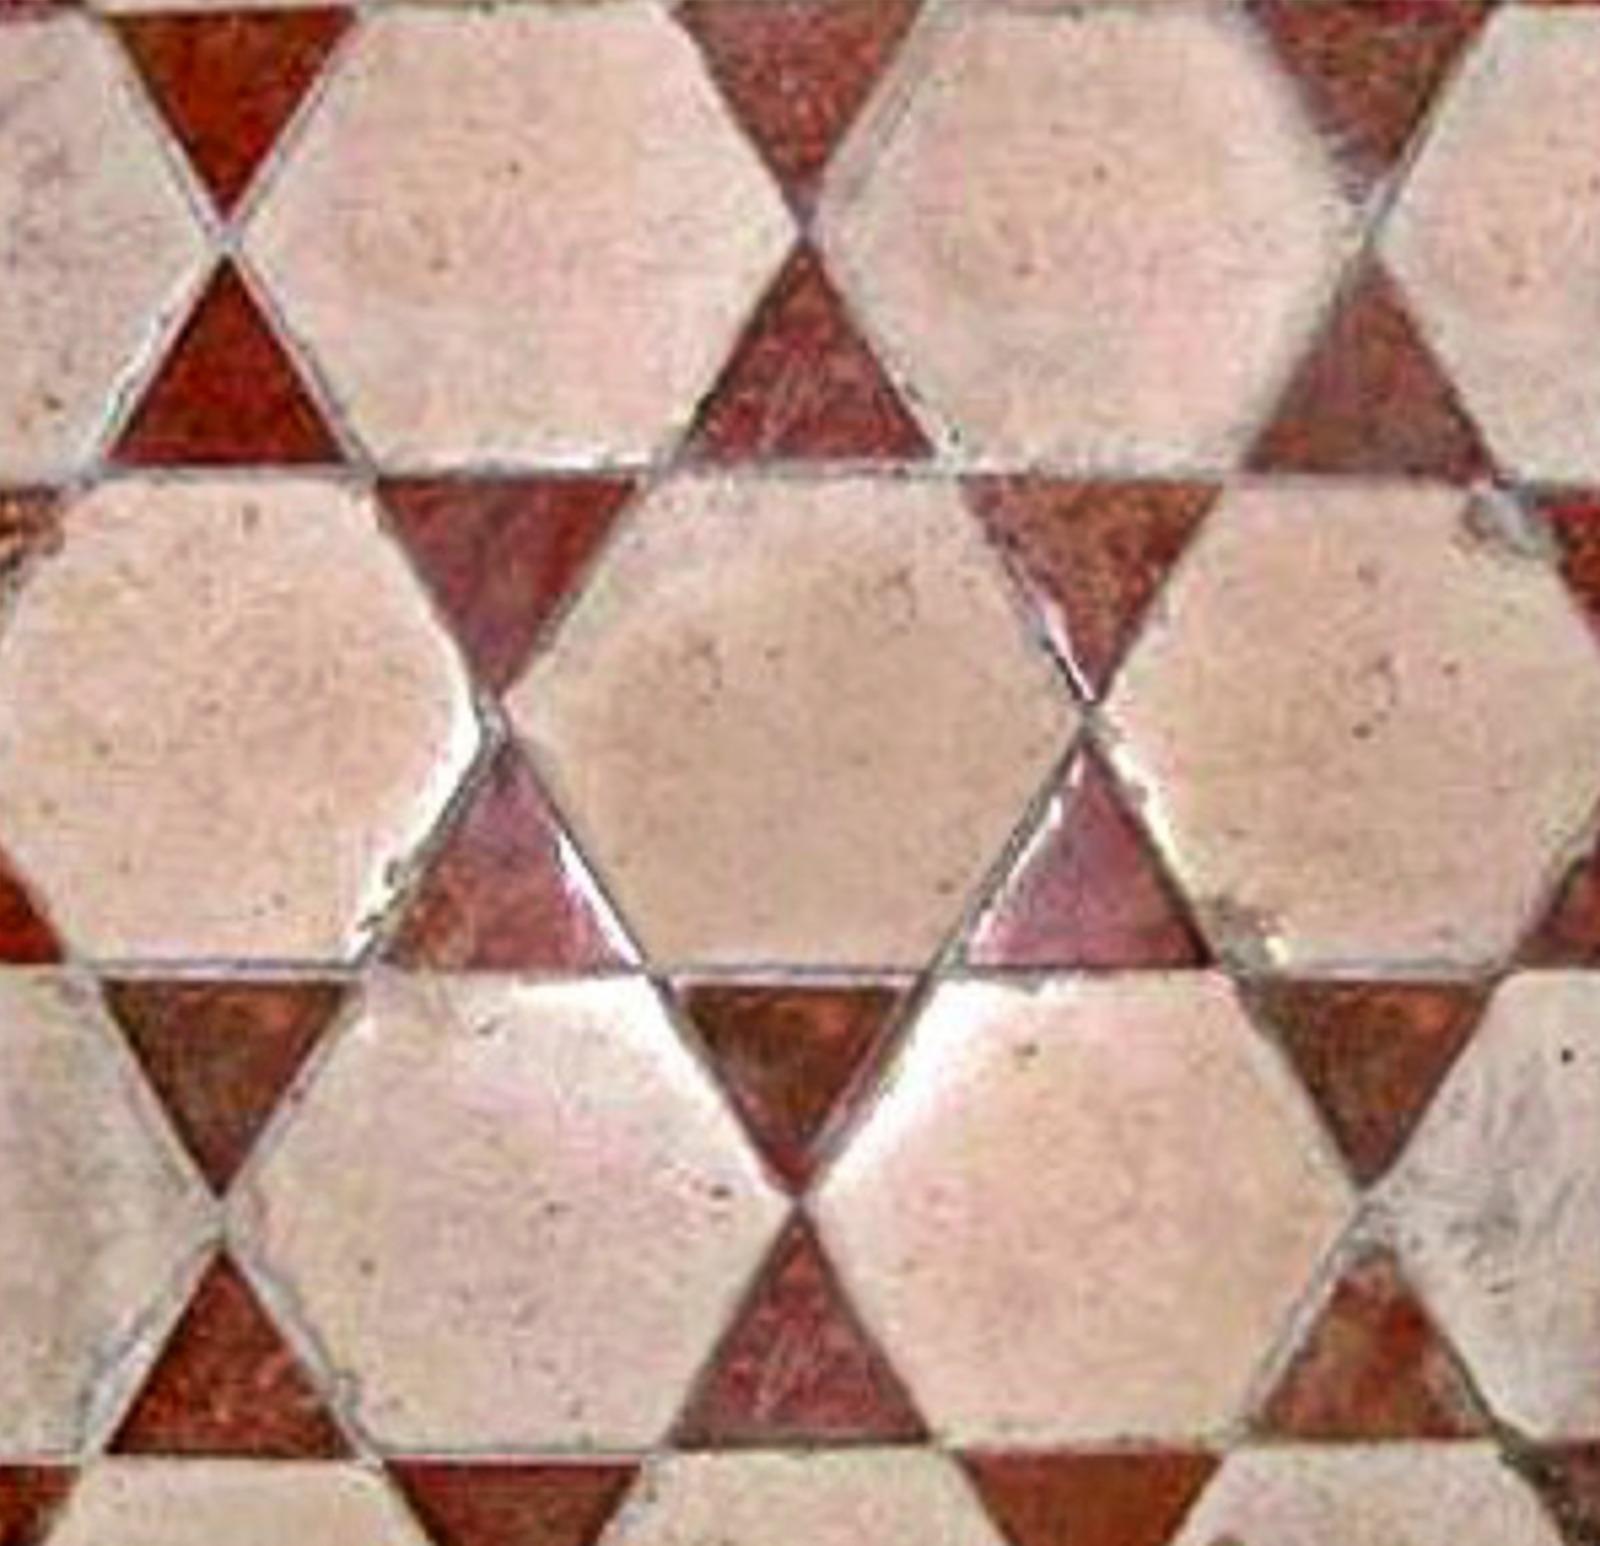 FLoor with Hexagons and Triangles in White Carrara Marble and Red Terracotta early 20th Century
Made with white Carrara marble hexagons and terracotta triangles.
Copy of the floor of the Basilica of Collemaggio (L'Aquila).
THICKNESS 3cm
WEIGHT